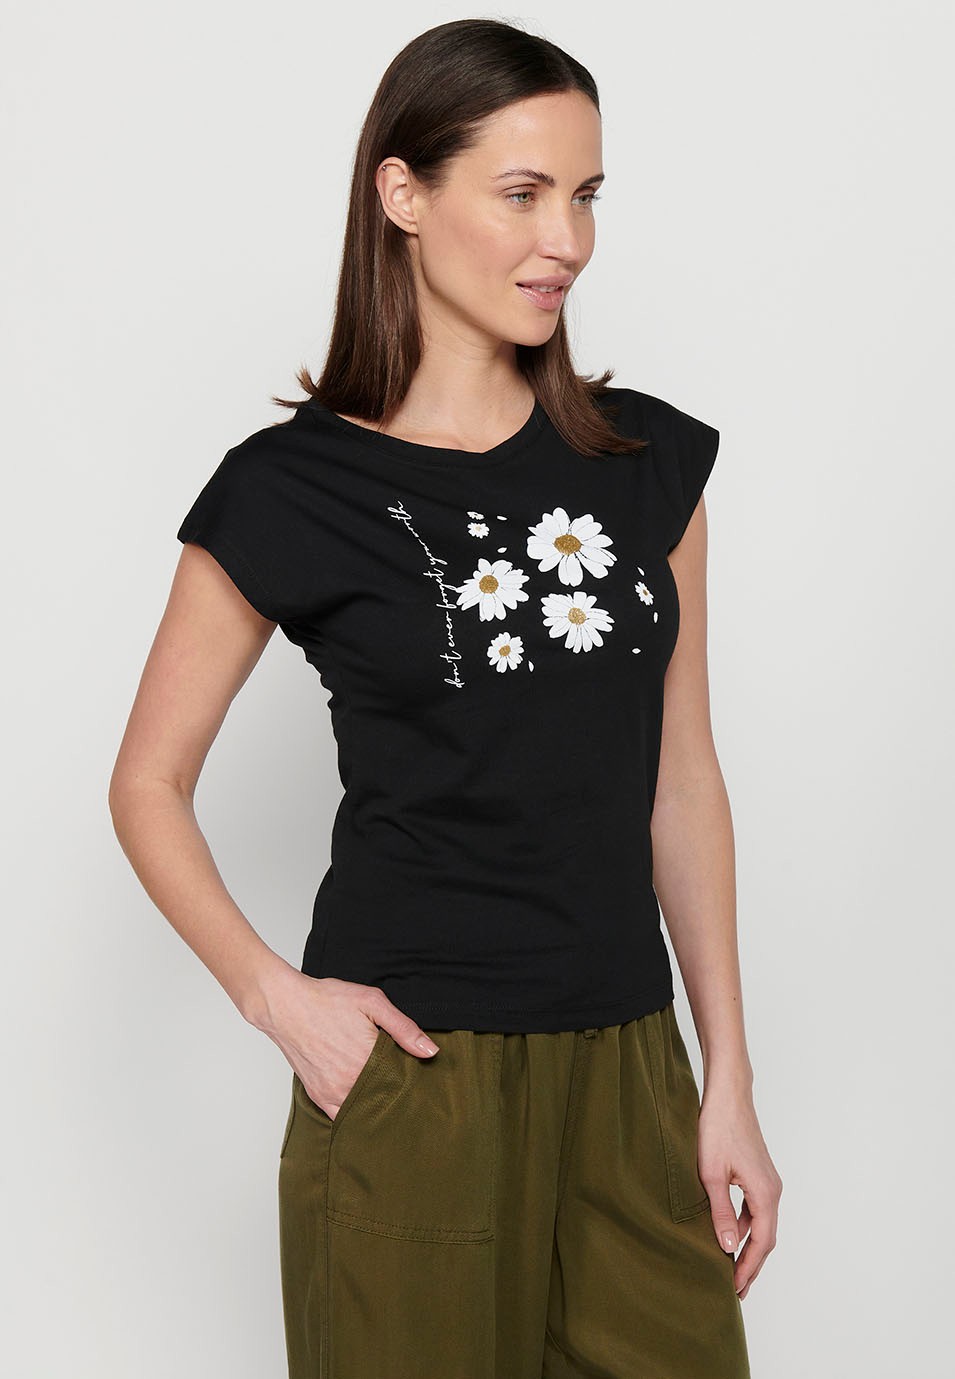 Short-sleeved cotton T-shirt with round neck and front print in Black for Women